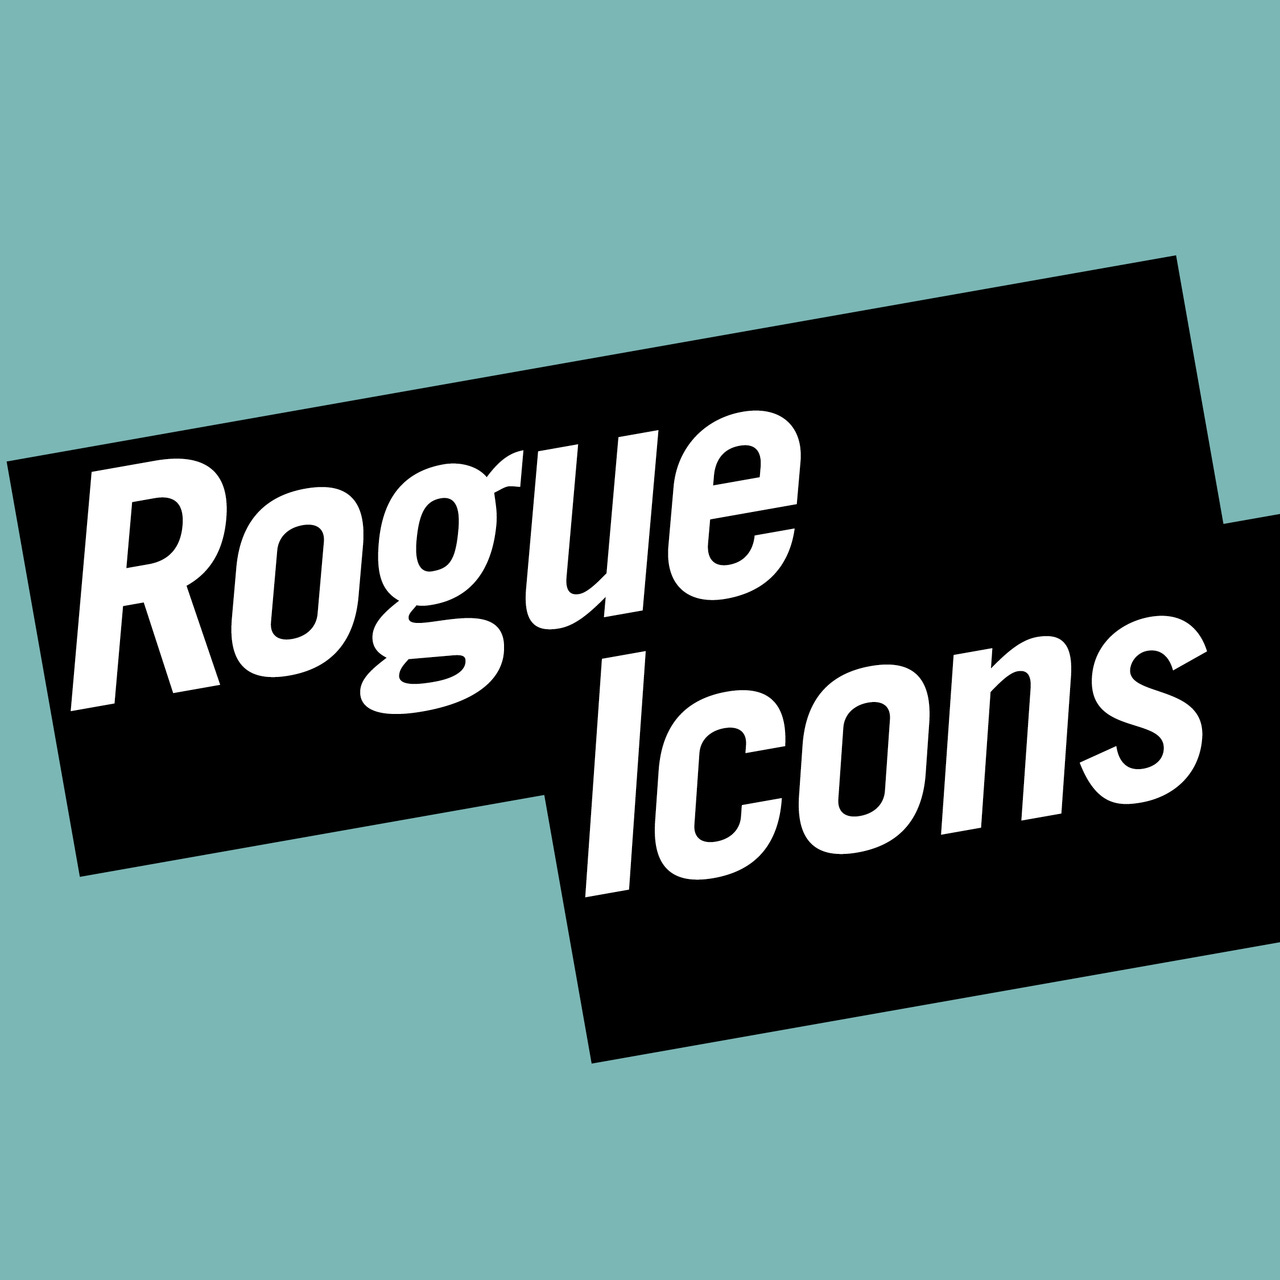 Nick Cook’s Rogue Icons